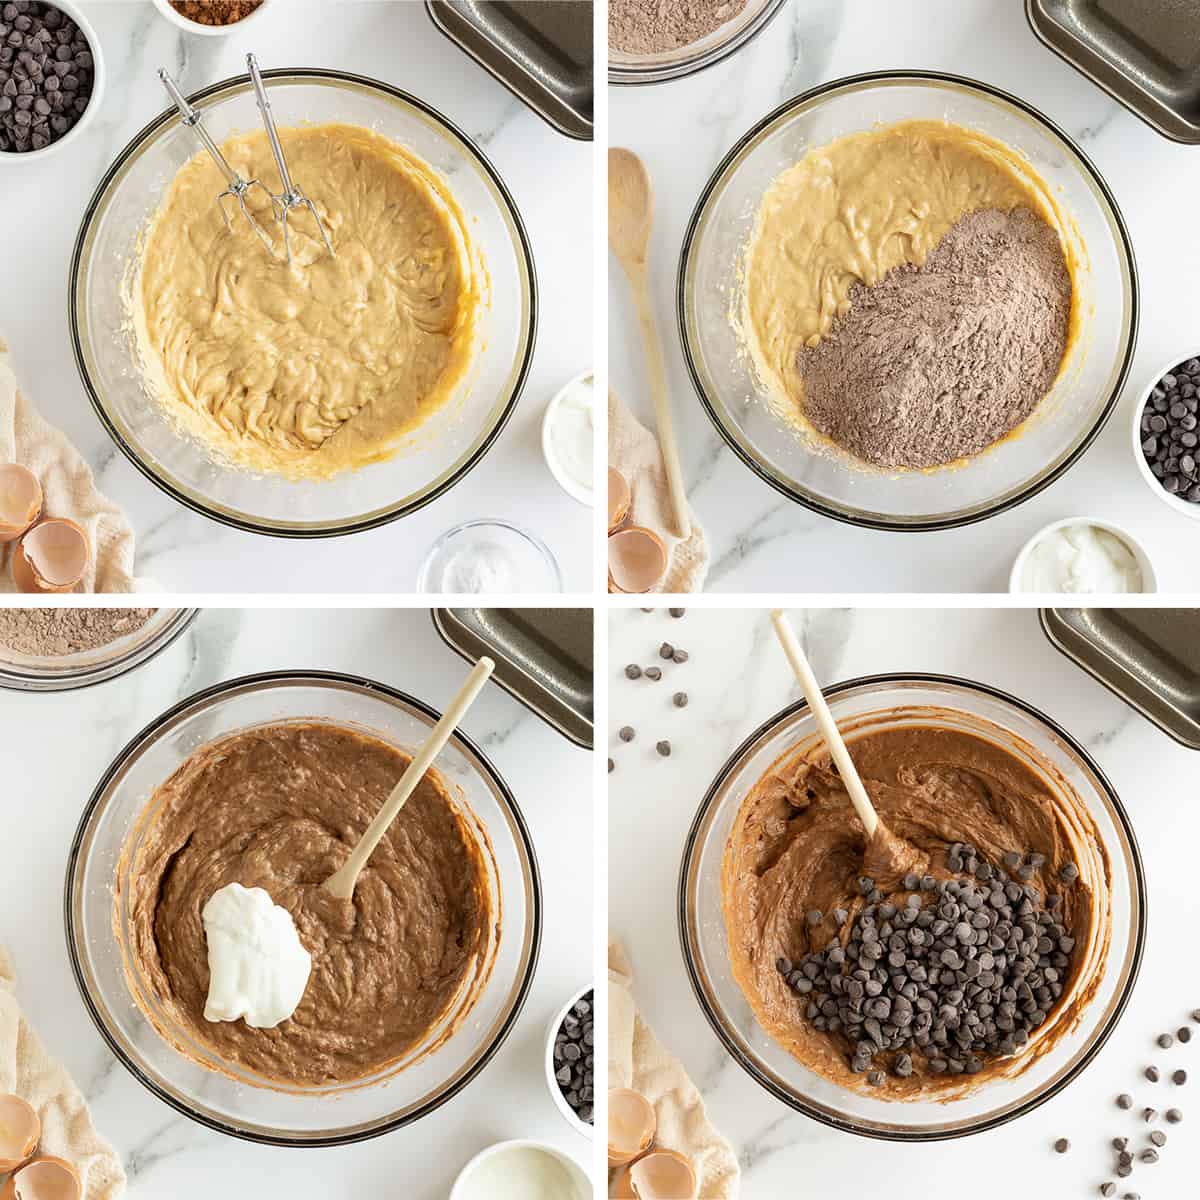 Four images showing chocolate peanut butter banana bread batter being mixed in a bowl with a wooden spoon.